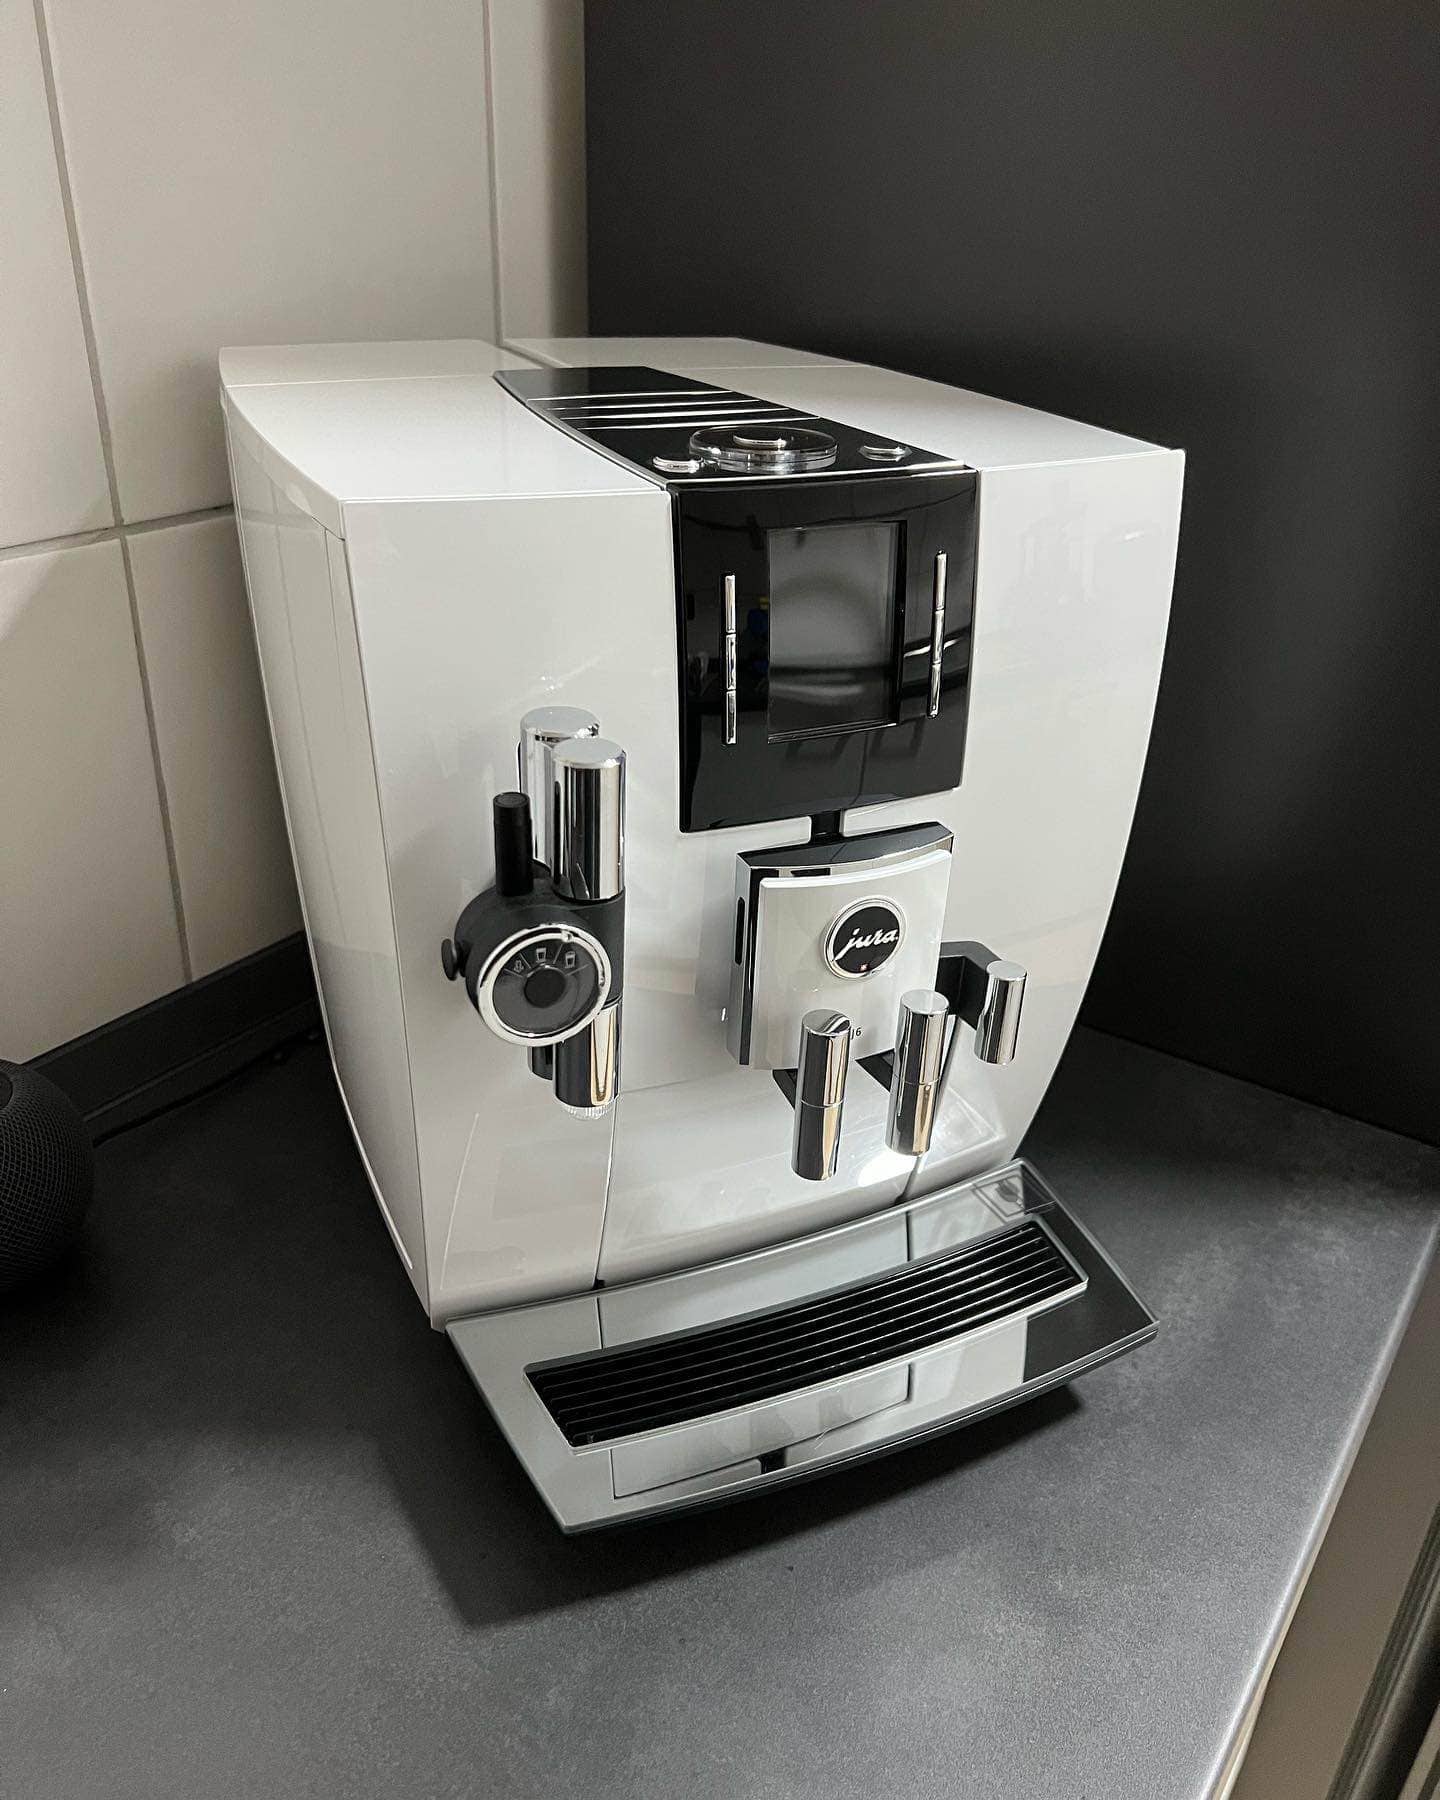 Jura J6 has various classic milk-based beverages like latte, flat white, and cappuccino